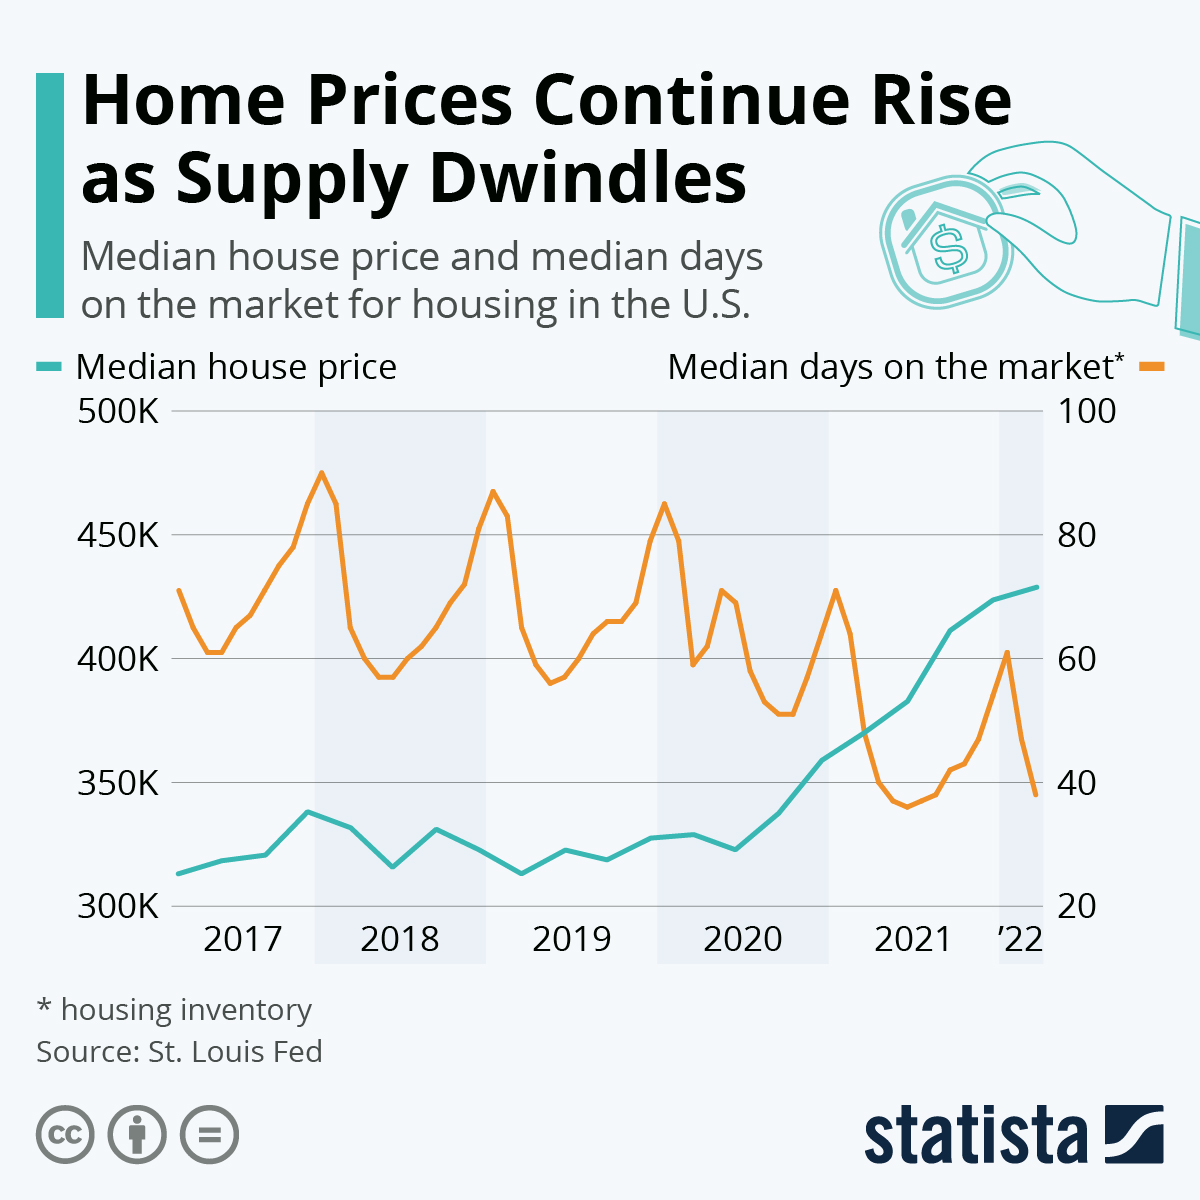 Home Prices Continue Rise as Supply Dwindles
